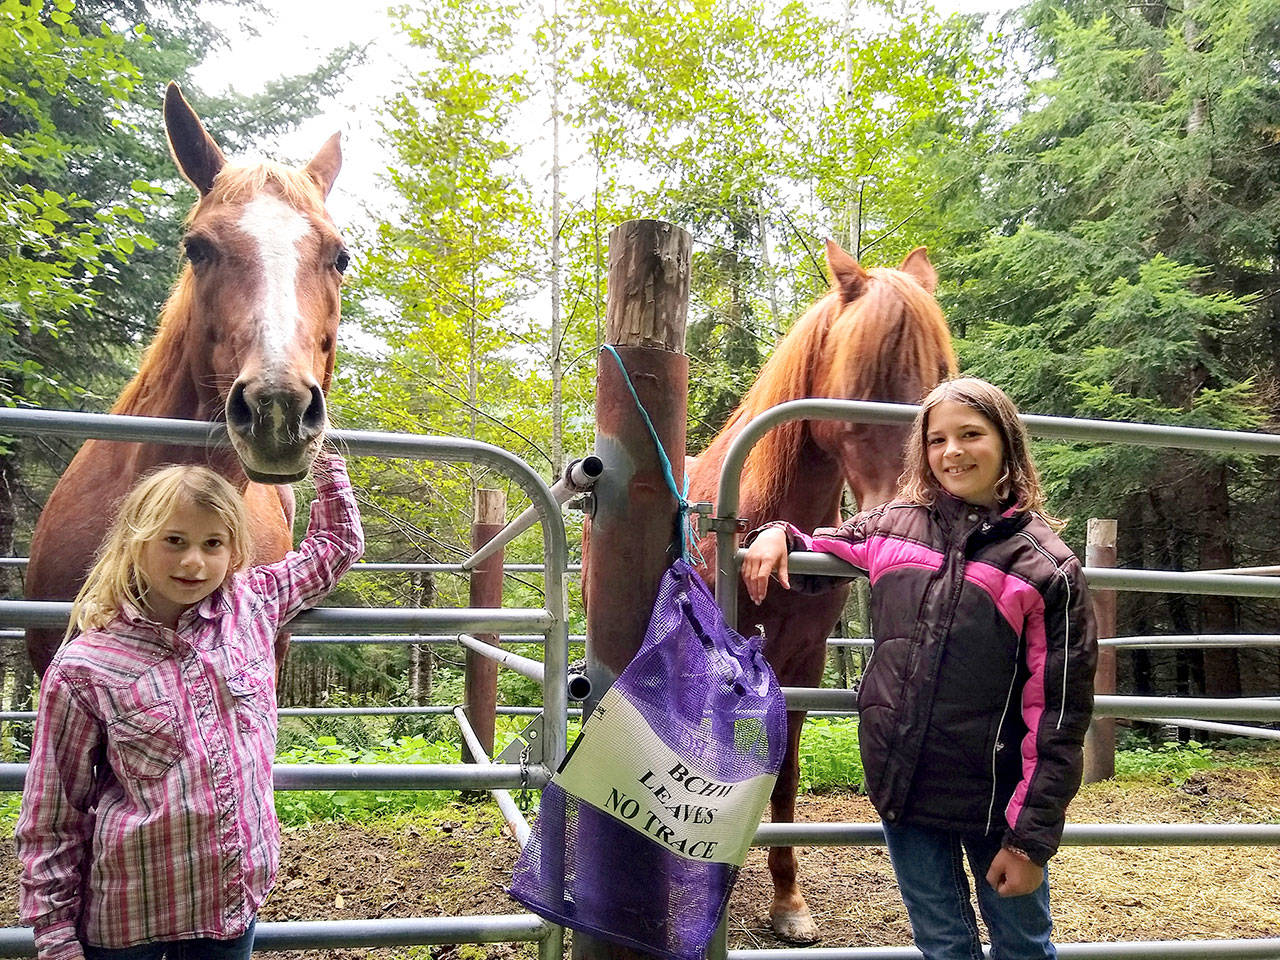 Sloan Pare, 6, hangs out with her horse, Smoking Gun, along with her sister Reegan Pare, 9, and her bashful ride, Tango. (Zorina Barker/for Peninsula Daily News)